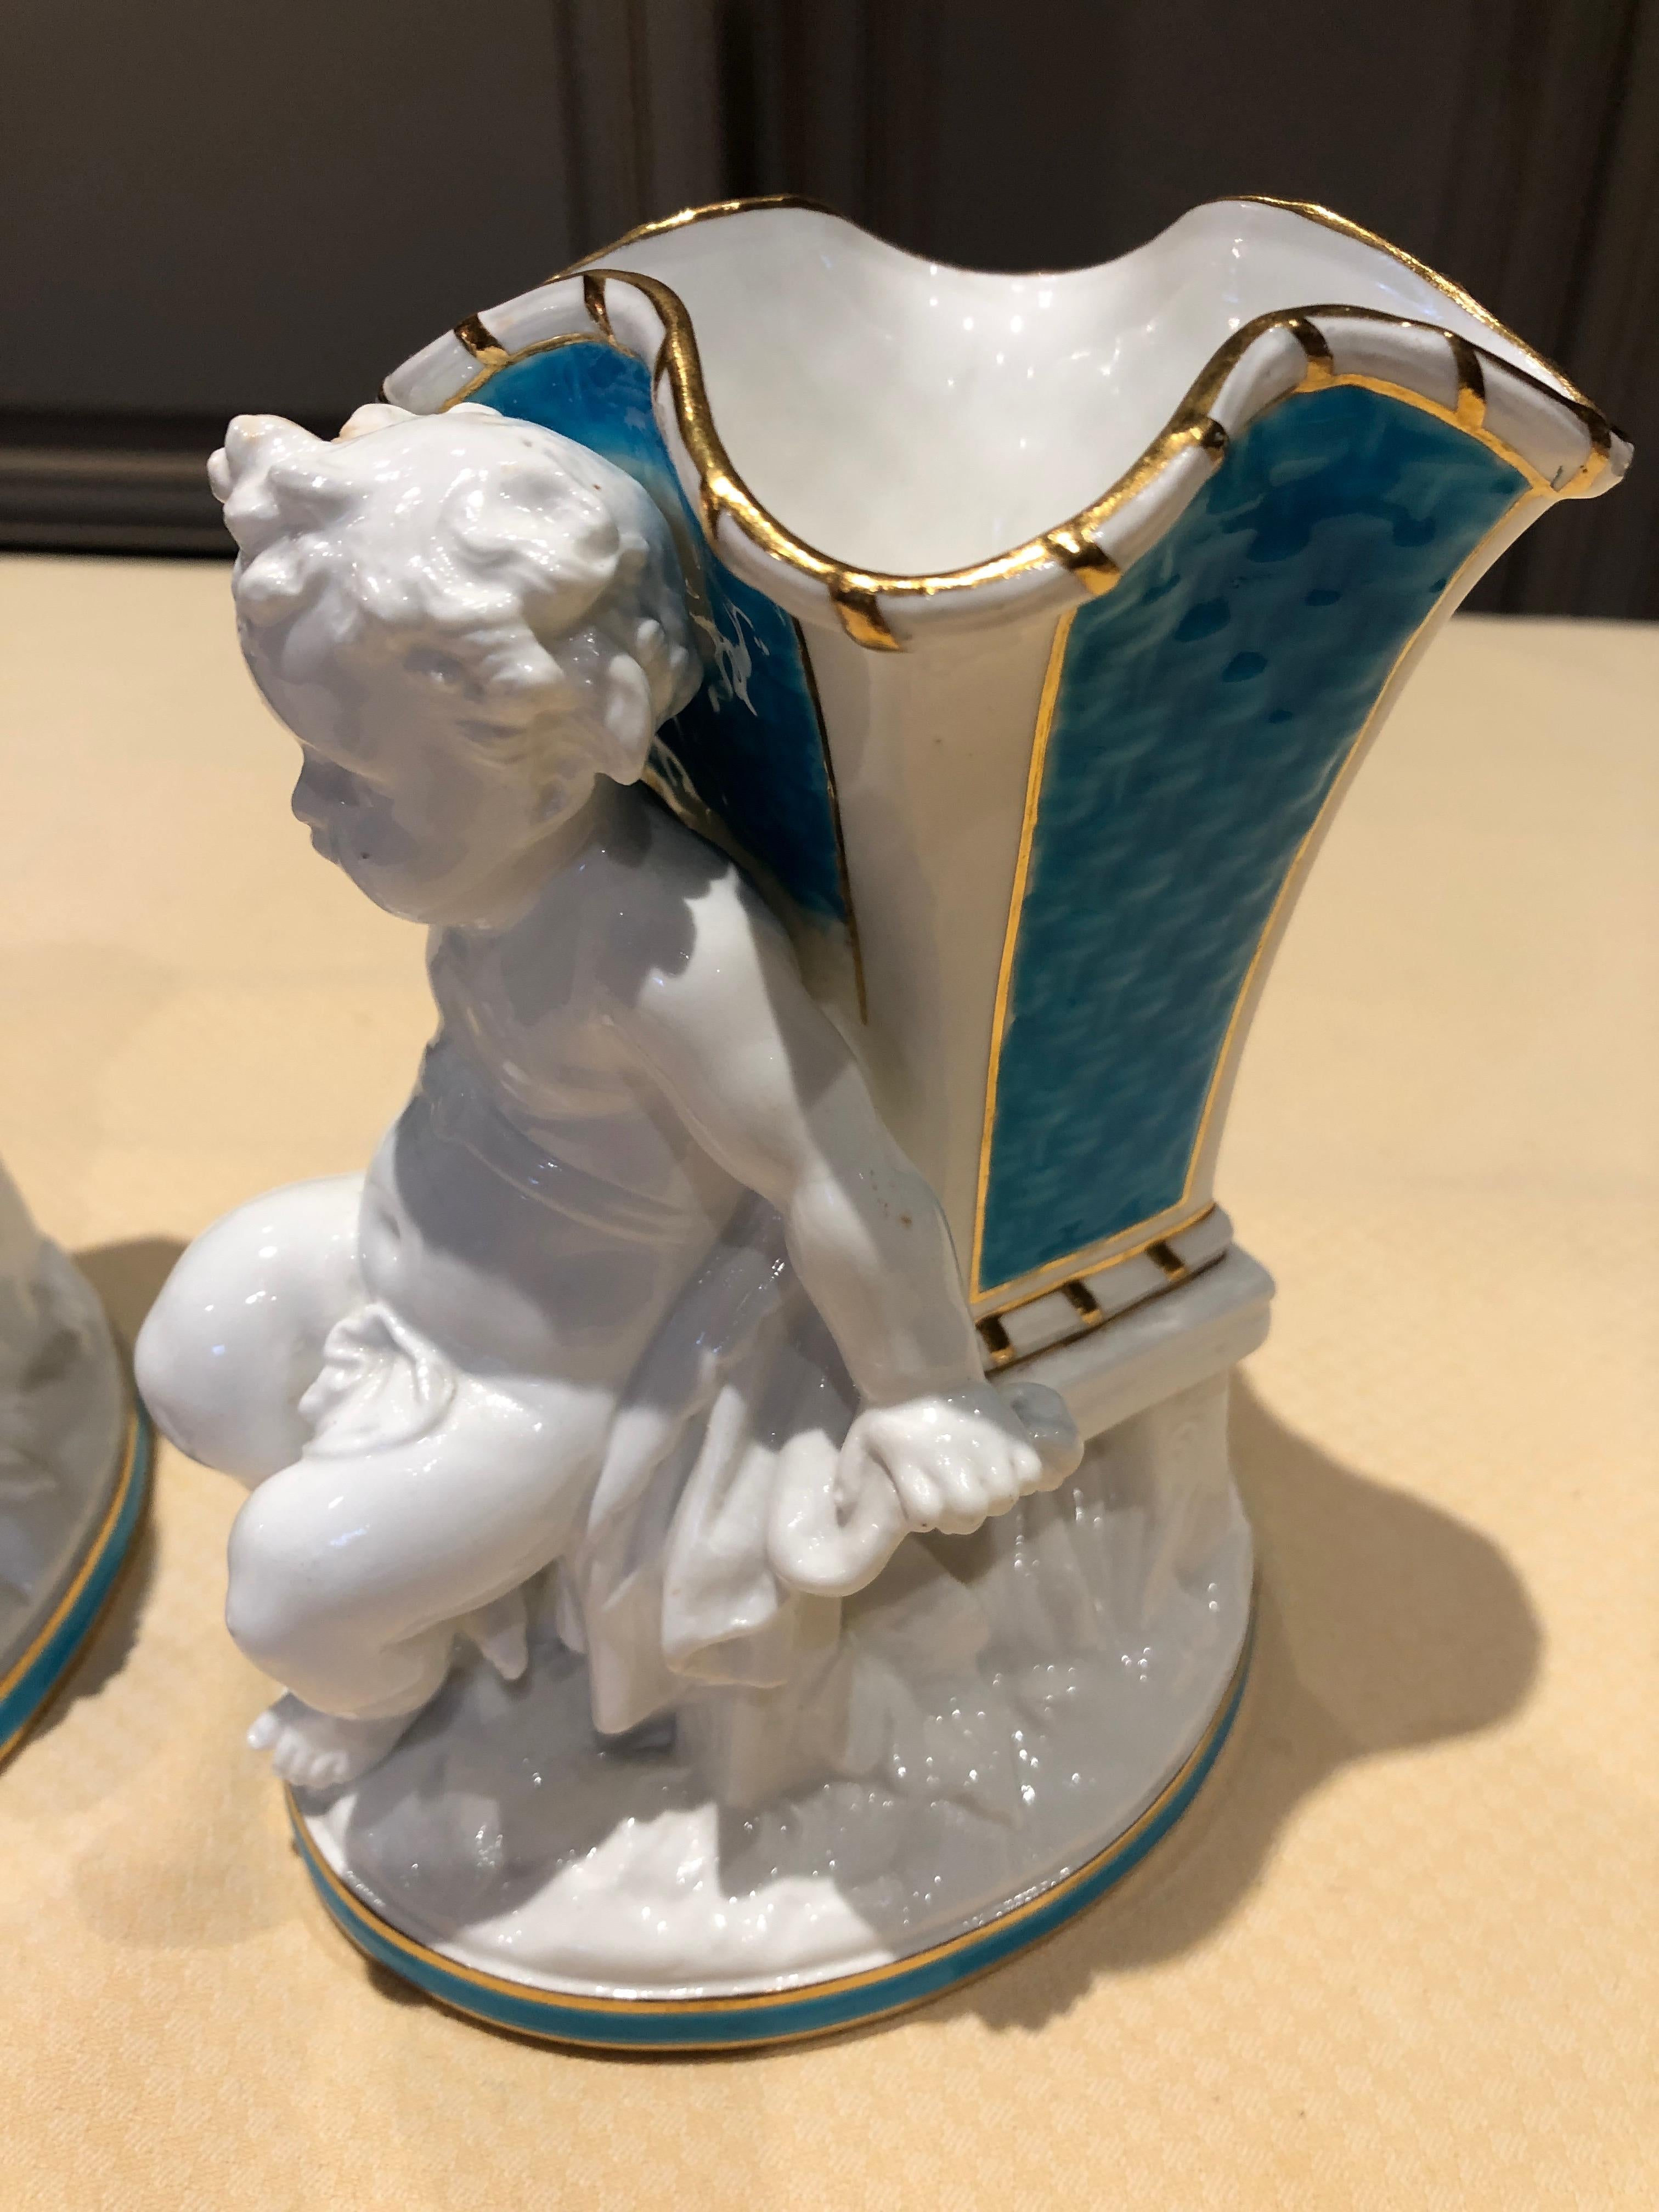 Superb Rare Pair of Cherub Minton Caldwell Tiffany Blue and White Spill Vases For Sale 4